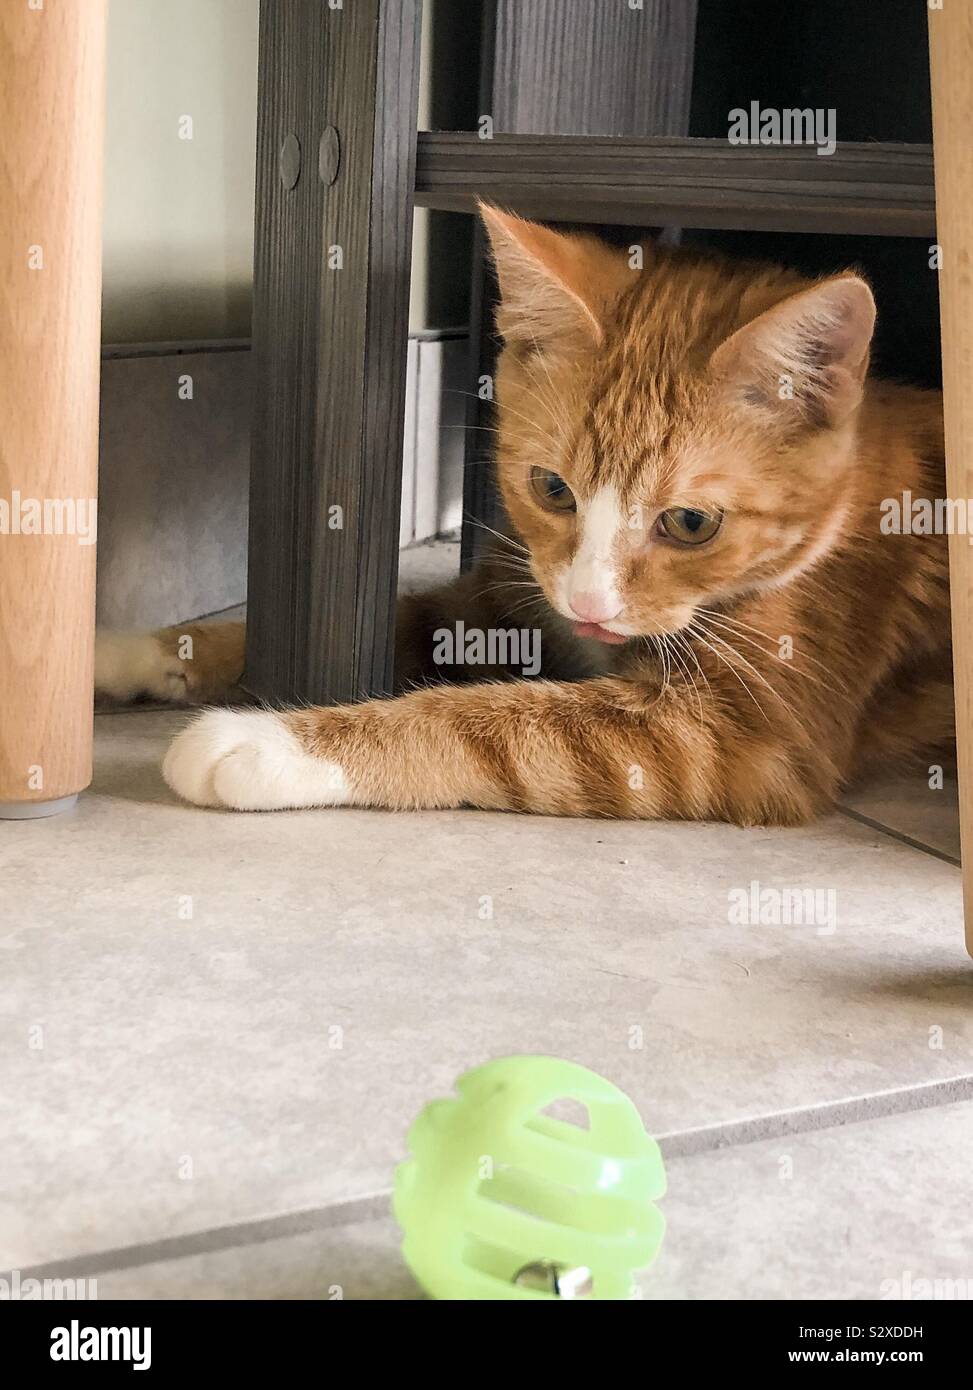 Four month old kitten eyeing a cat toy from his hiding place Stock Photo